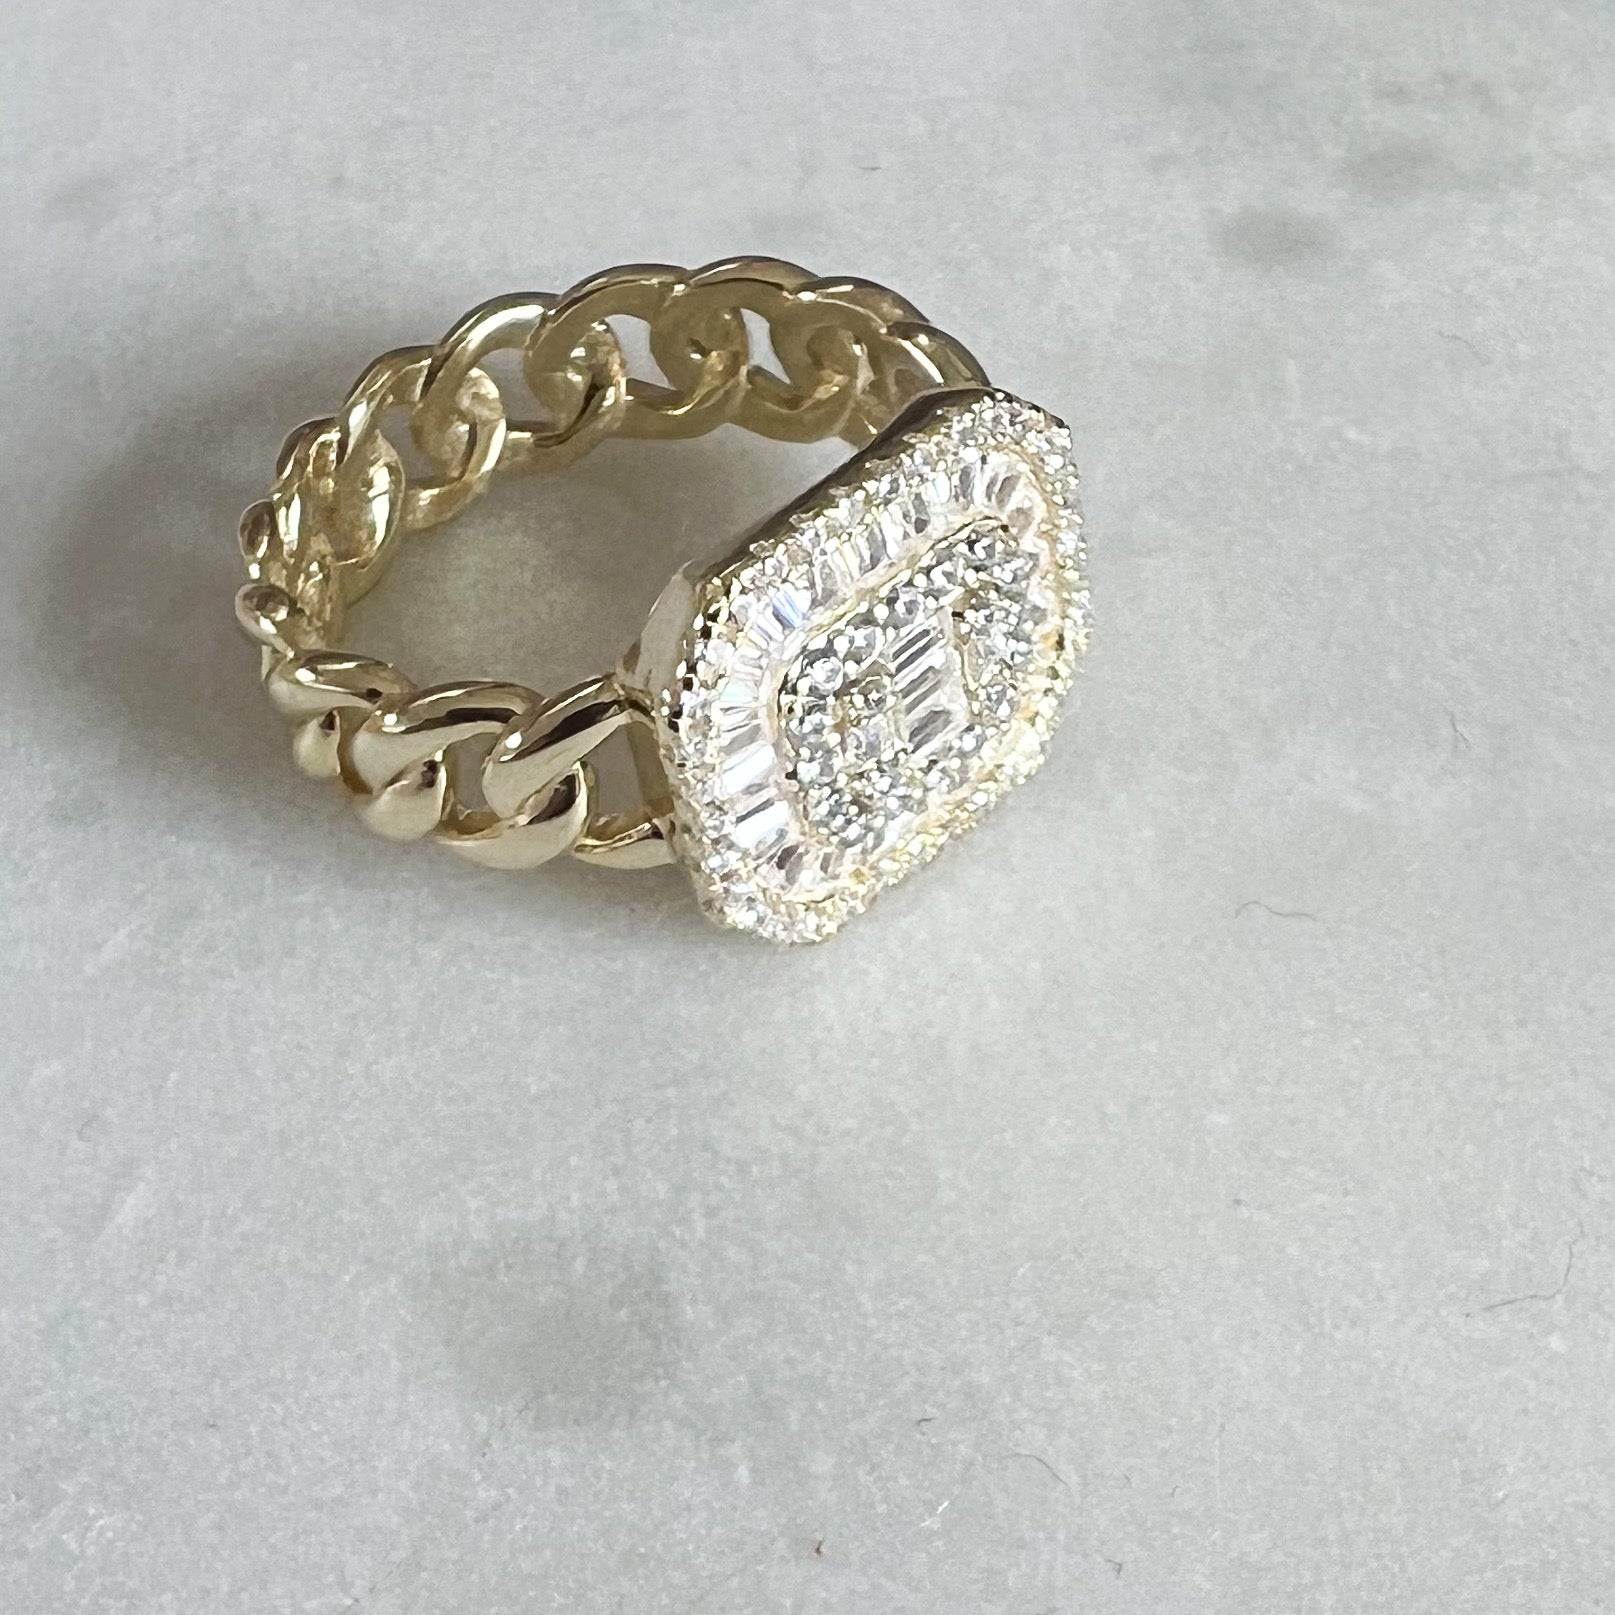 Baguette Box Gold Sterling Silver 925 Ring Size 7 - BelleStyle